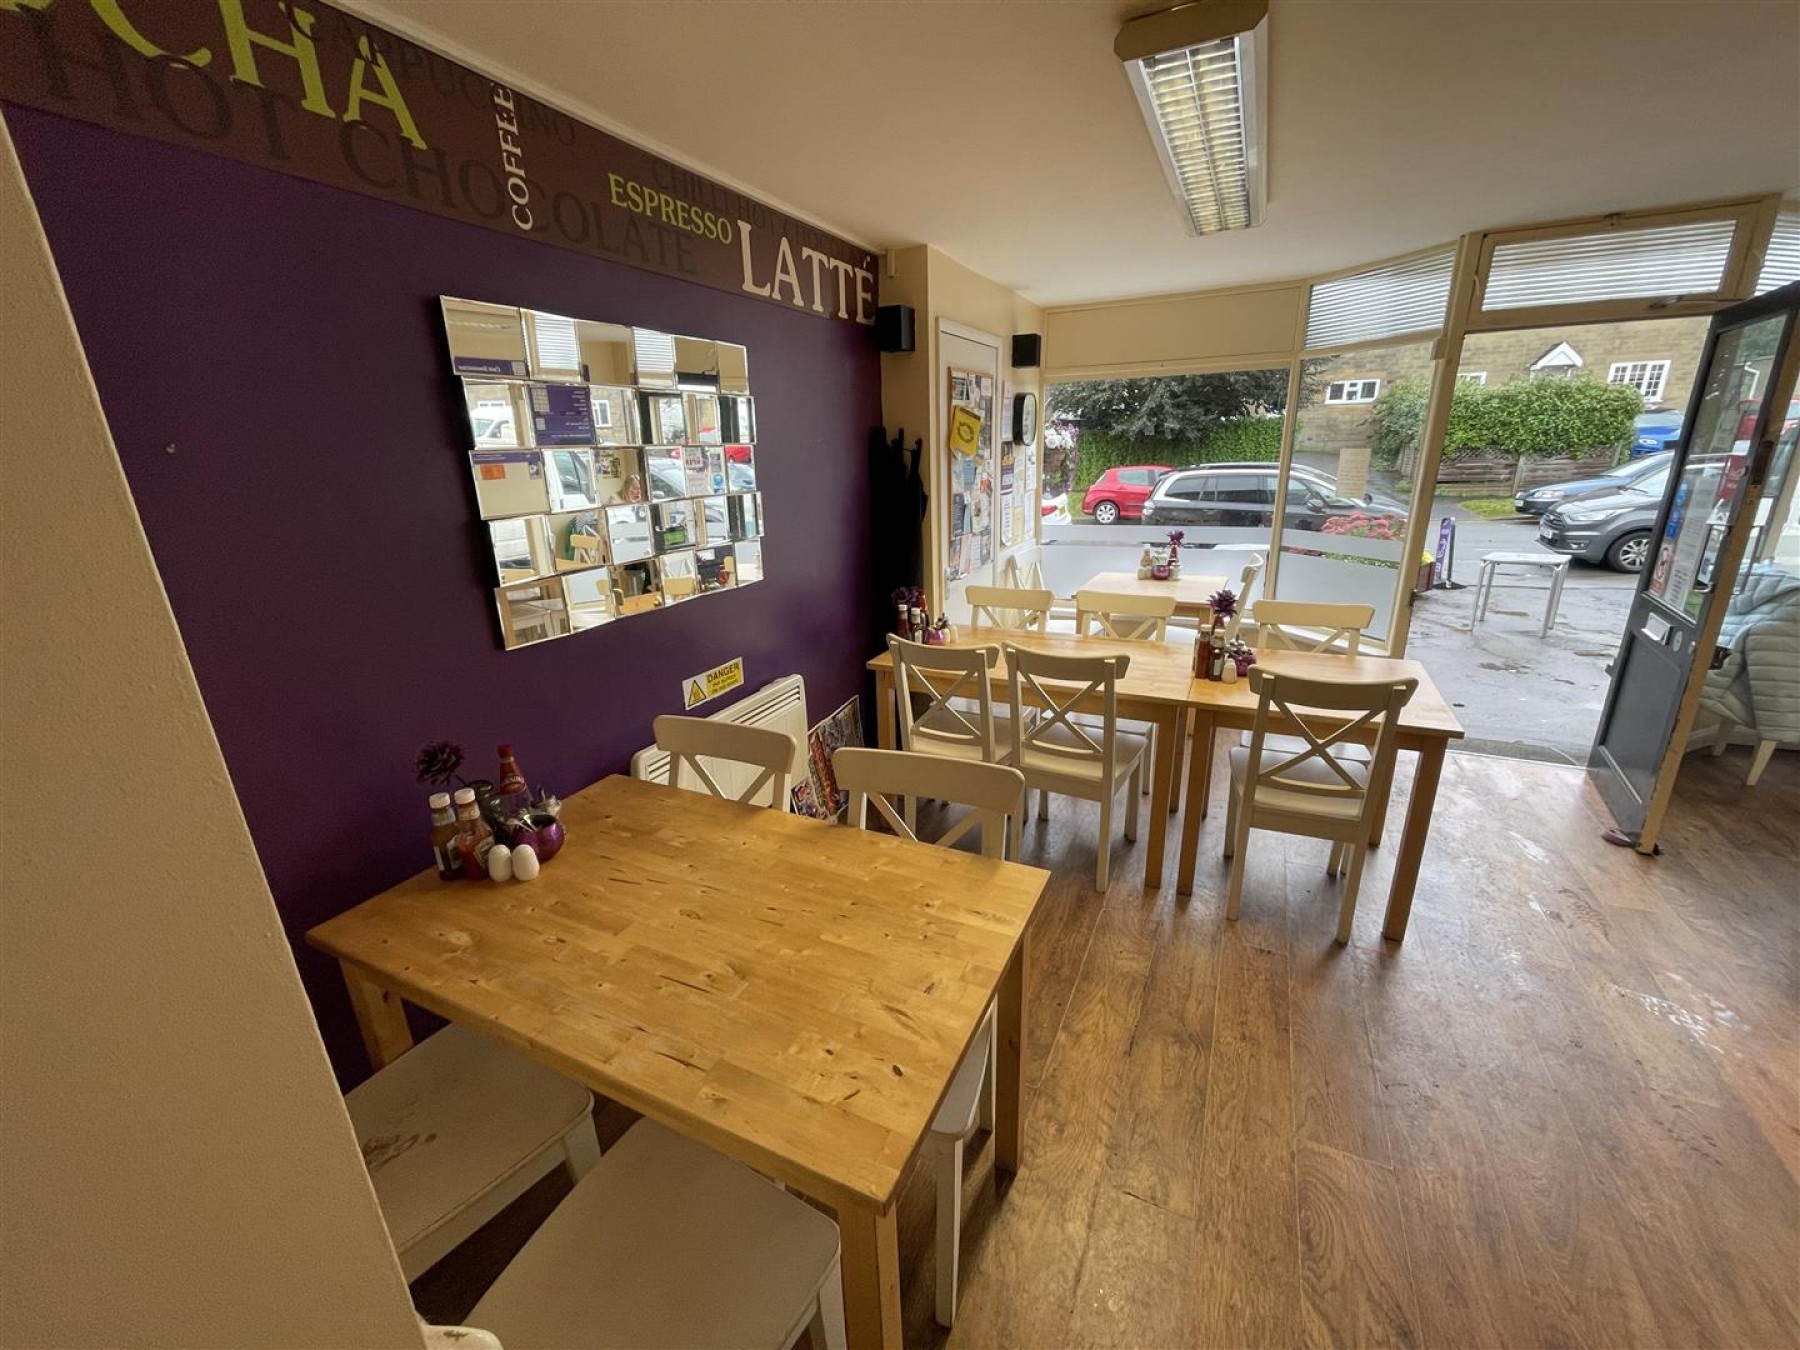 Images for 2 X FLATS | CAFE | WICK